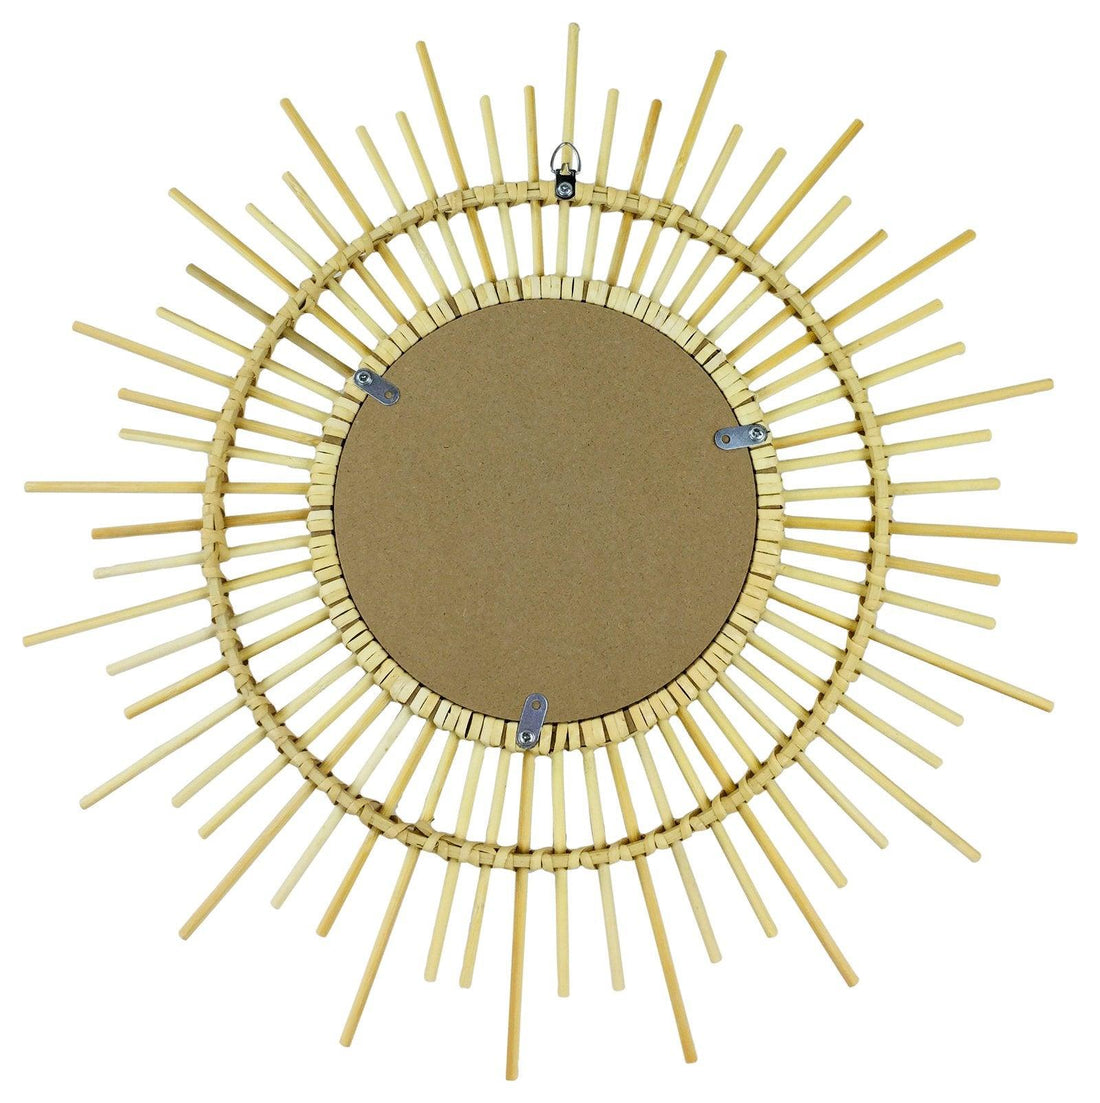 Rattan Mirrors Pointed 51cm - £49.99 - Mirrors 